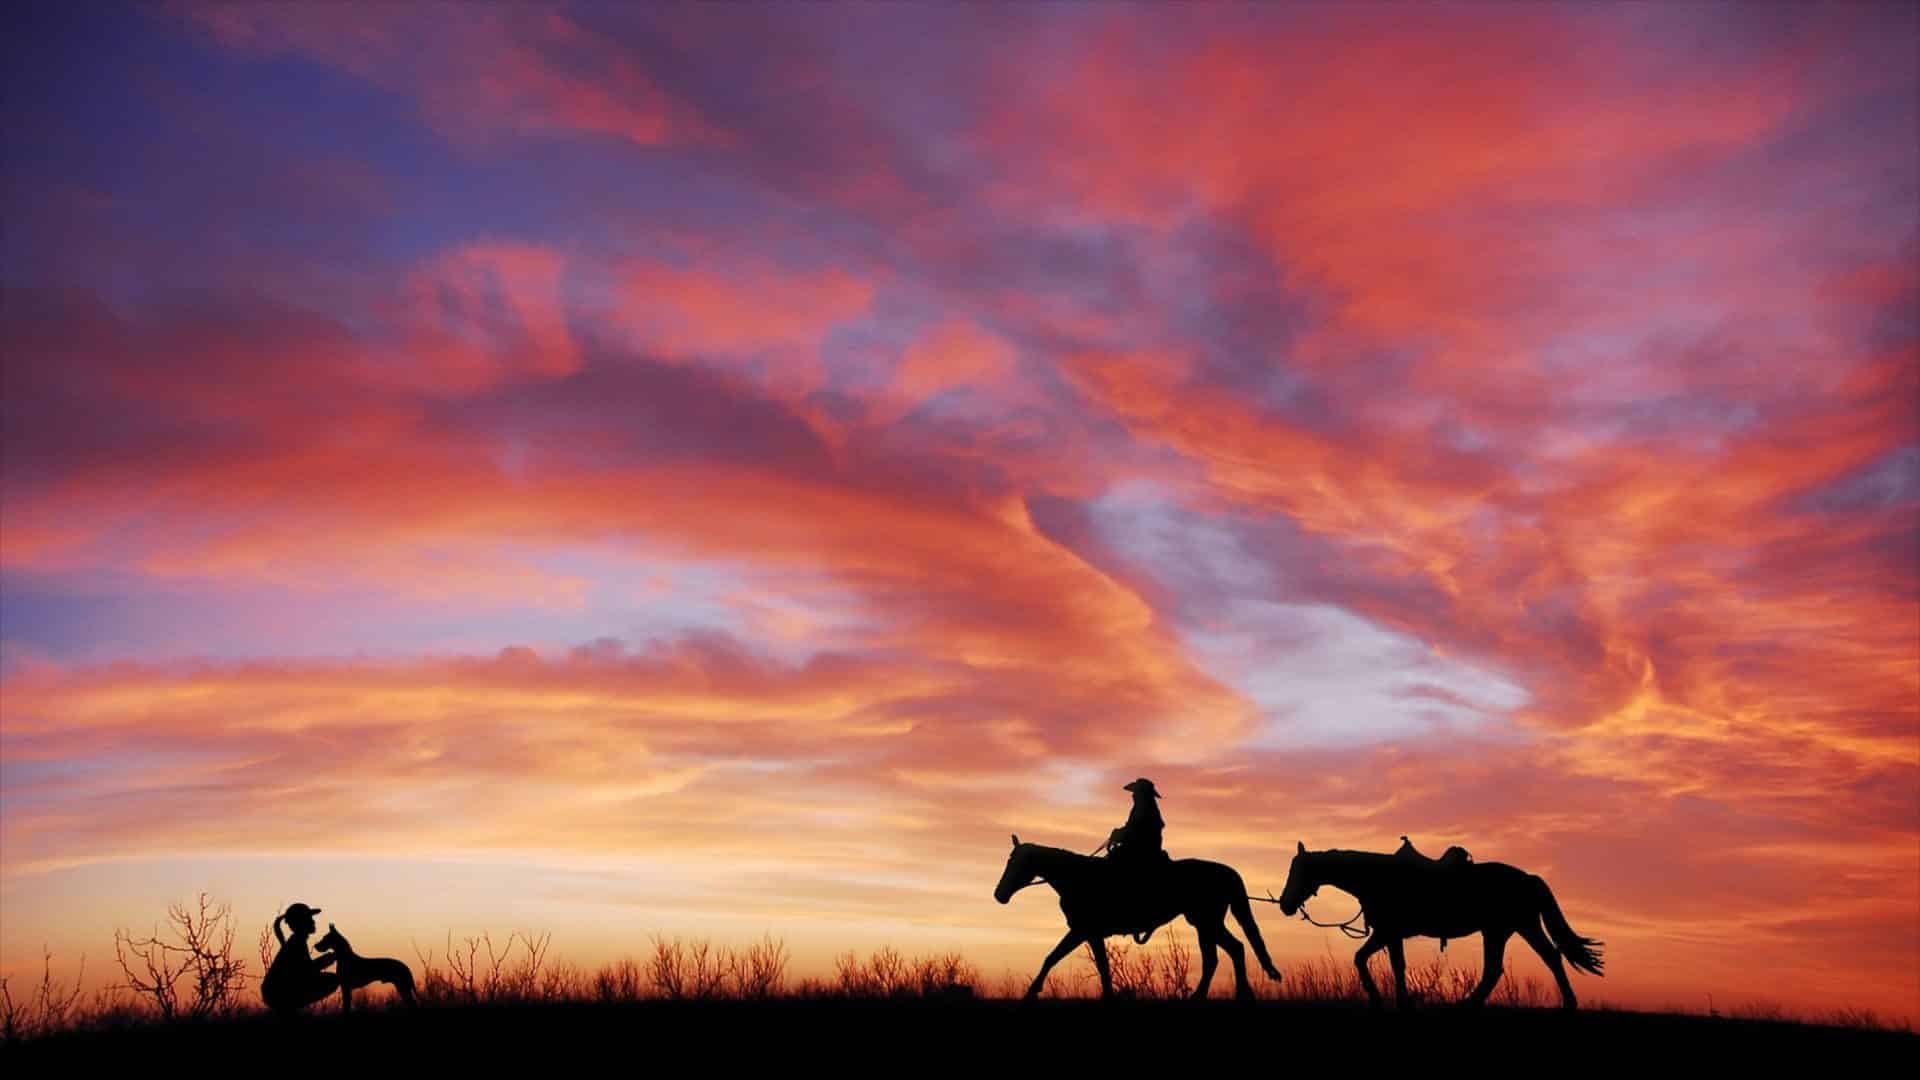 Silhouette of a woman riding horseback against a pink sunset sky